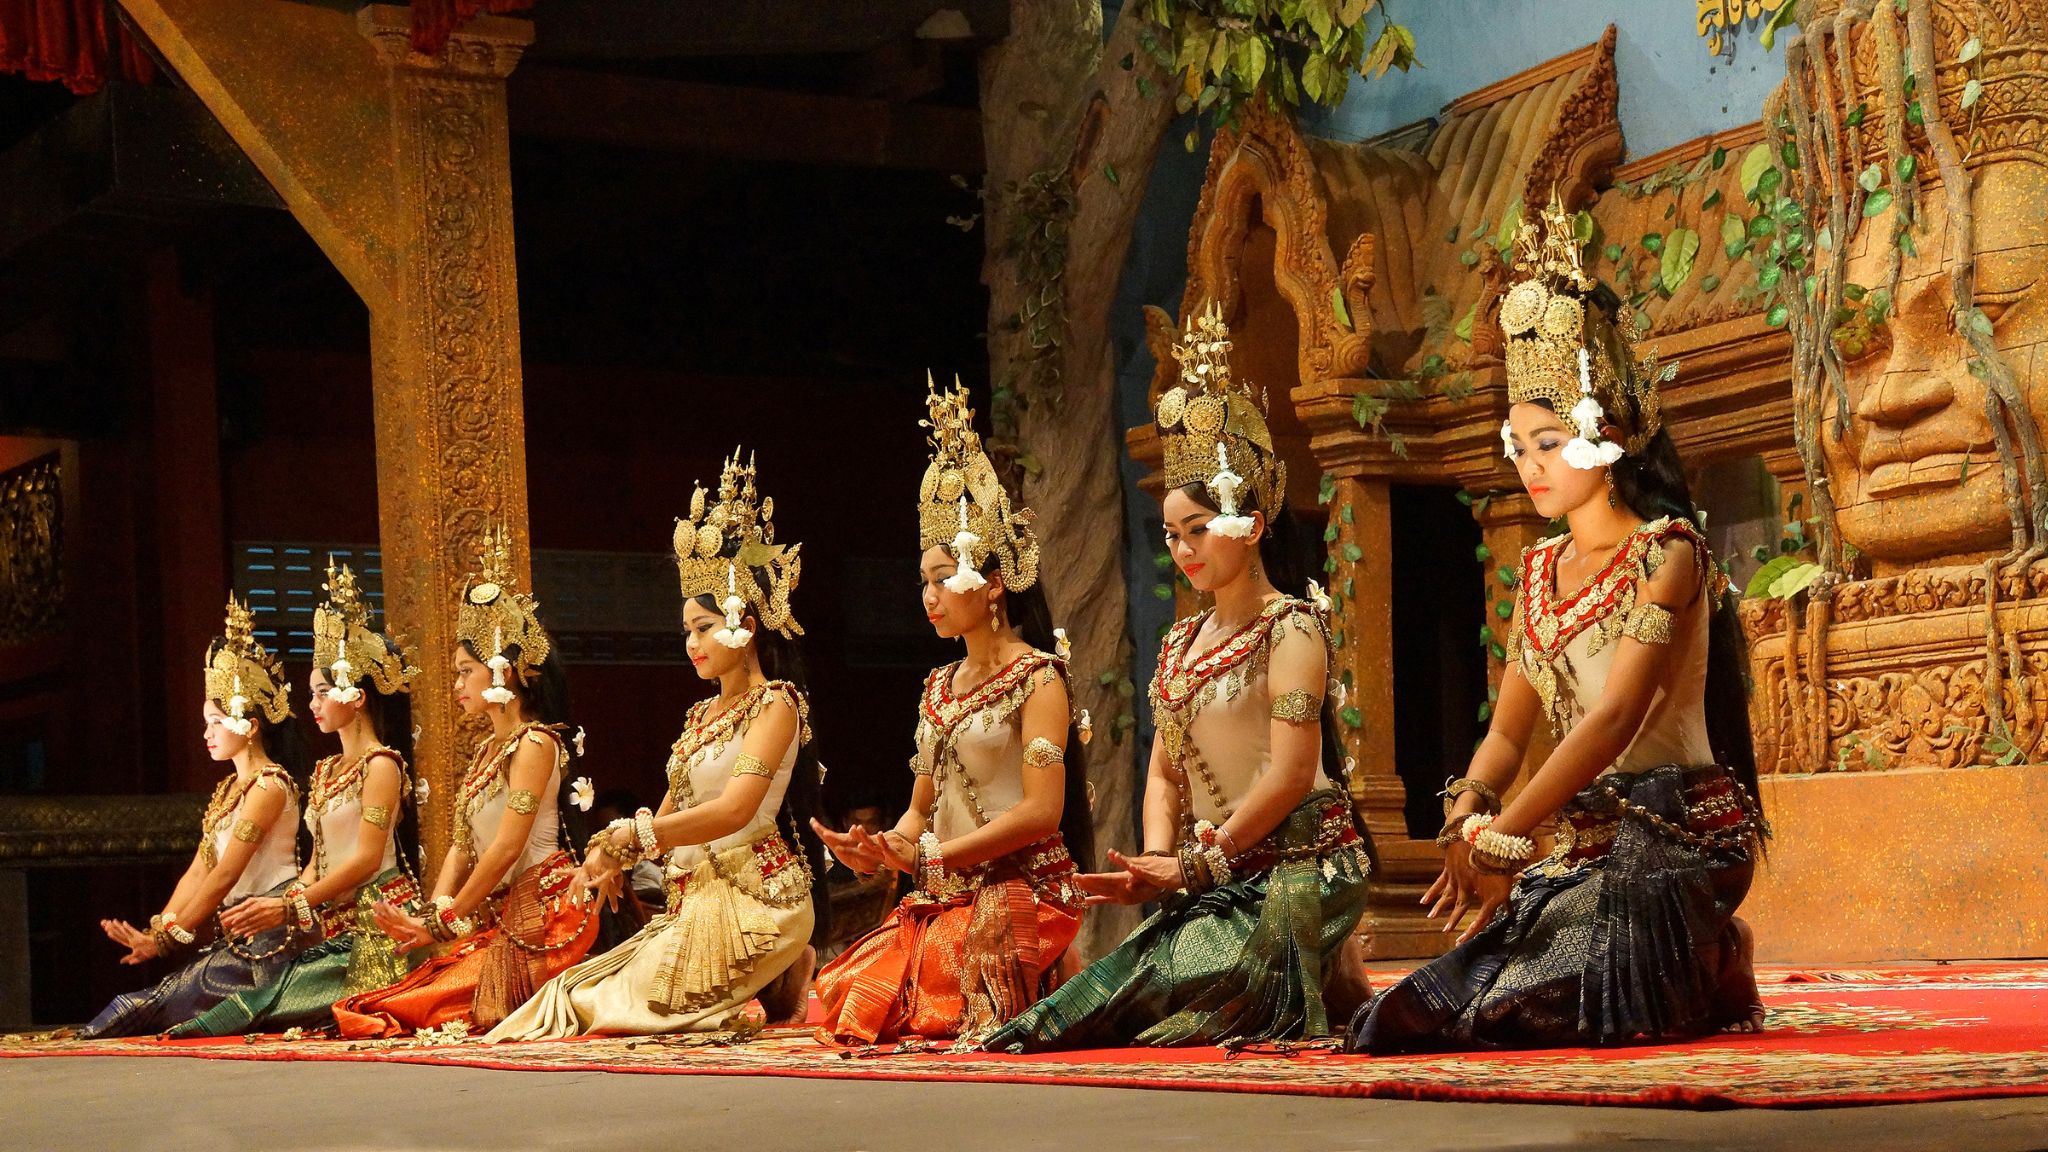 Day 1 Enjoy Traditional Apsara Dance In The End Of Day